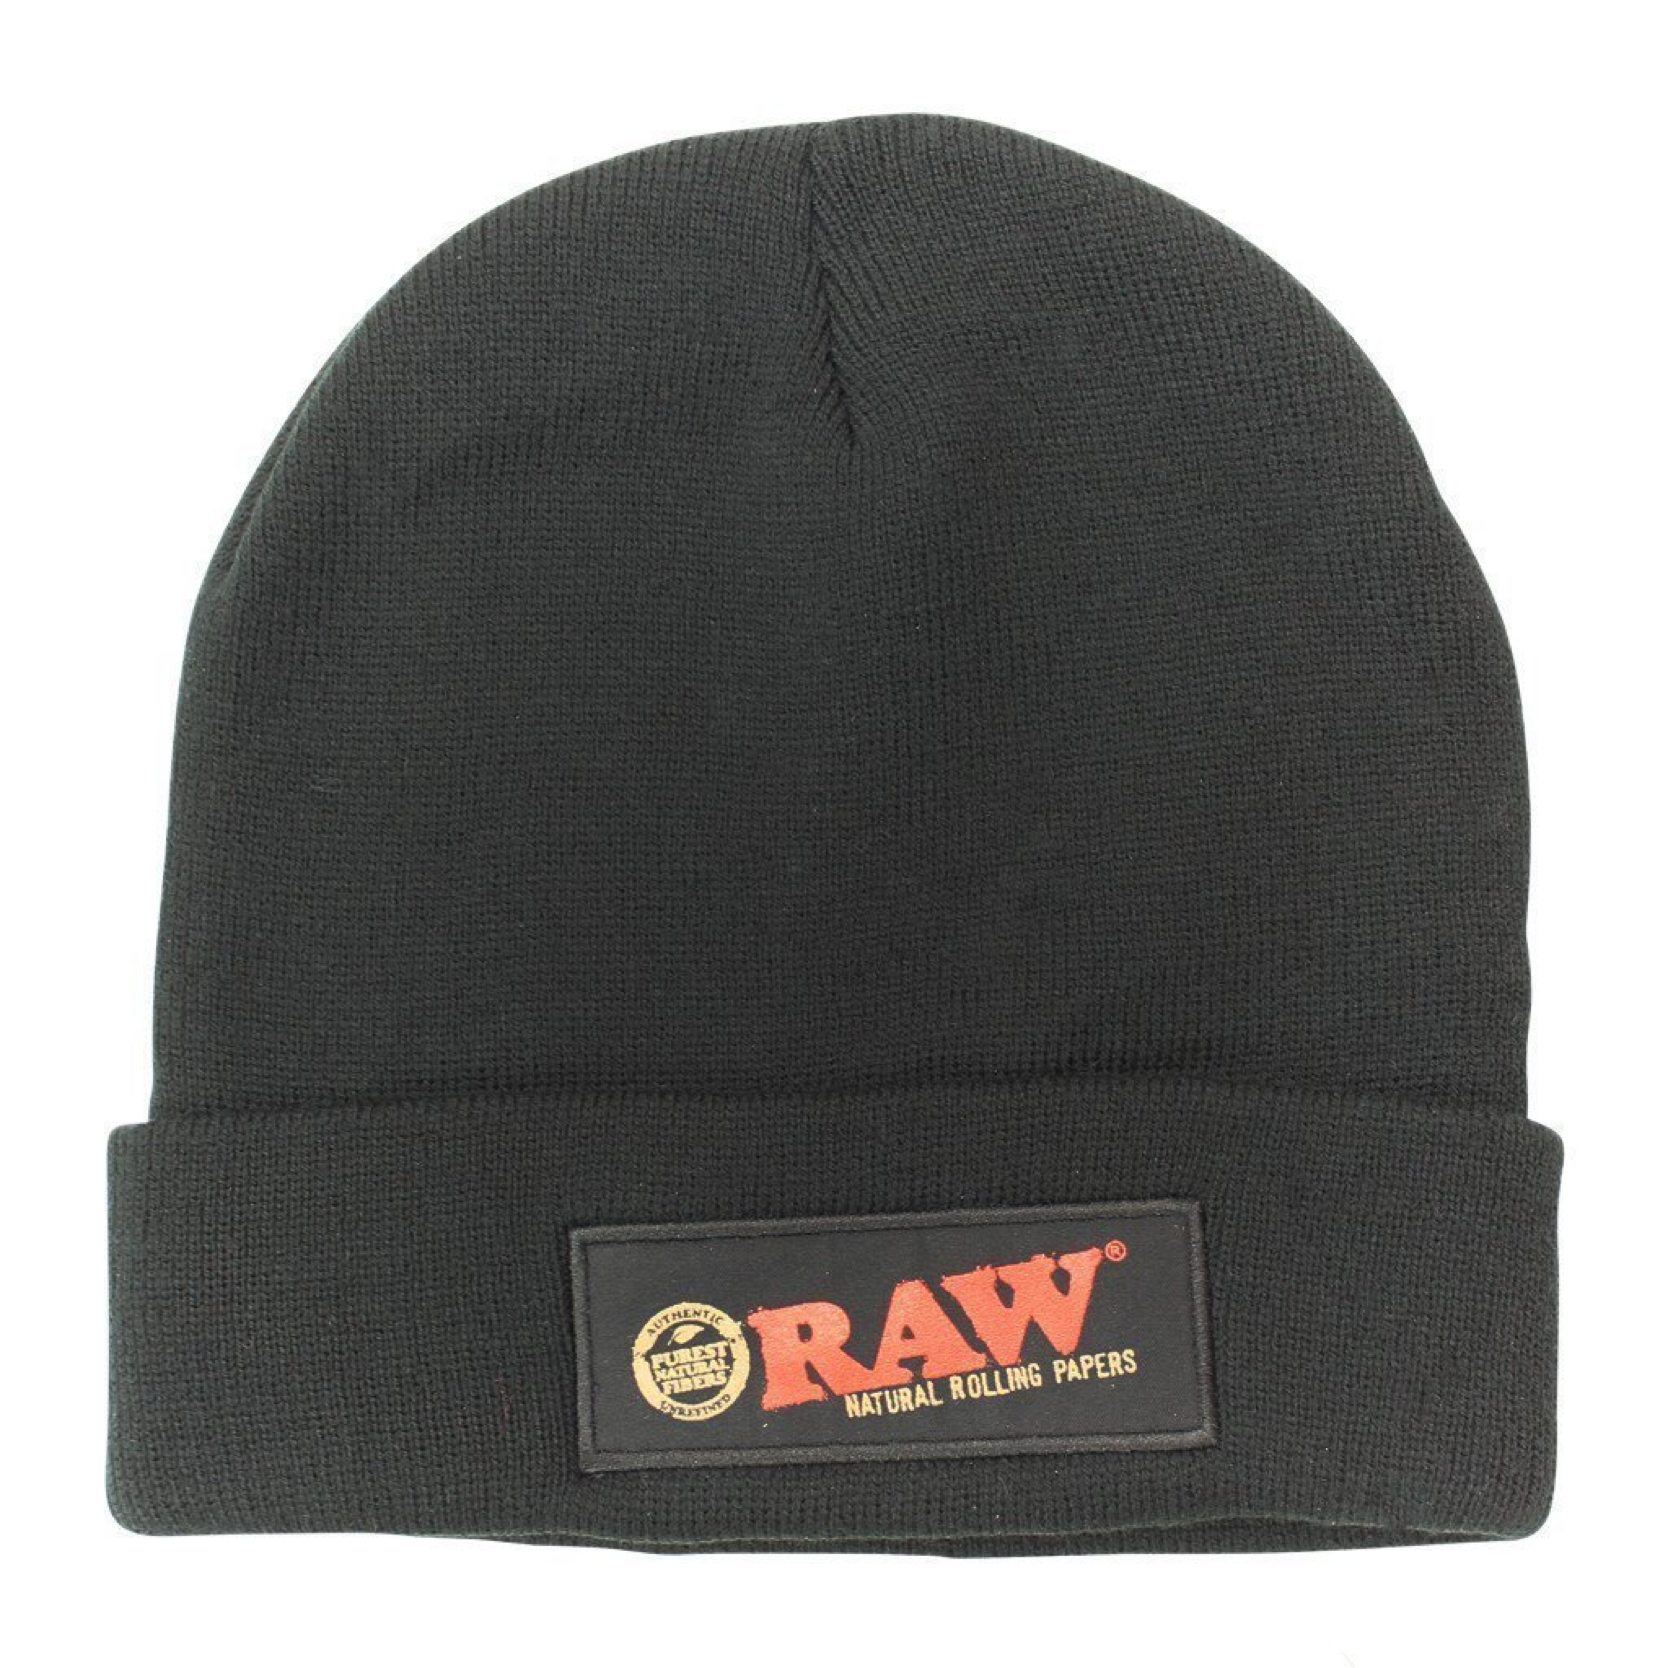 Raw® Rolling Papers Black Beanie Hat by RAW Rolling Papers | Mission Dispensary